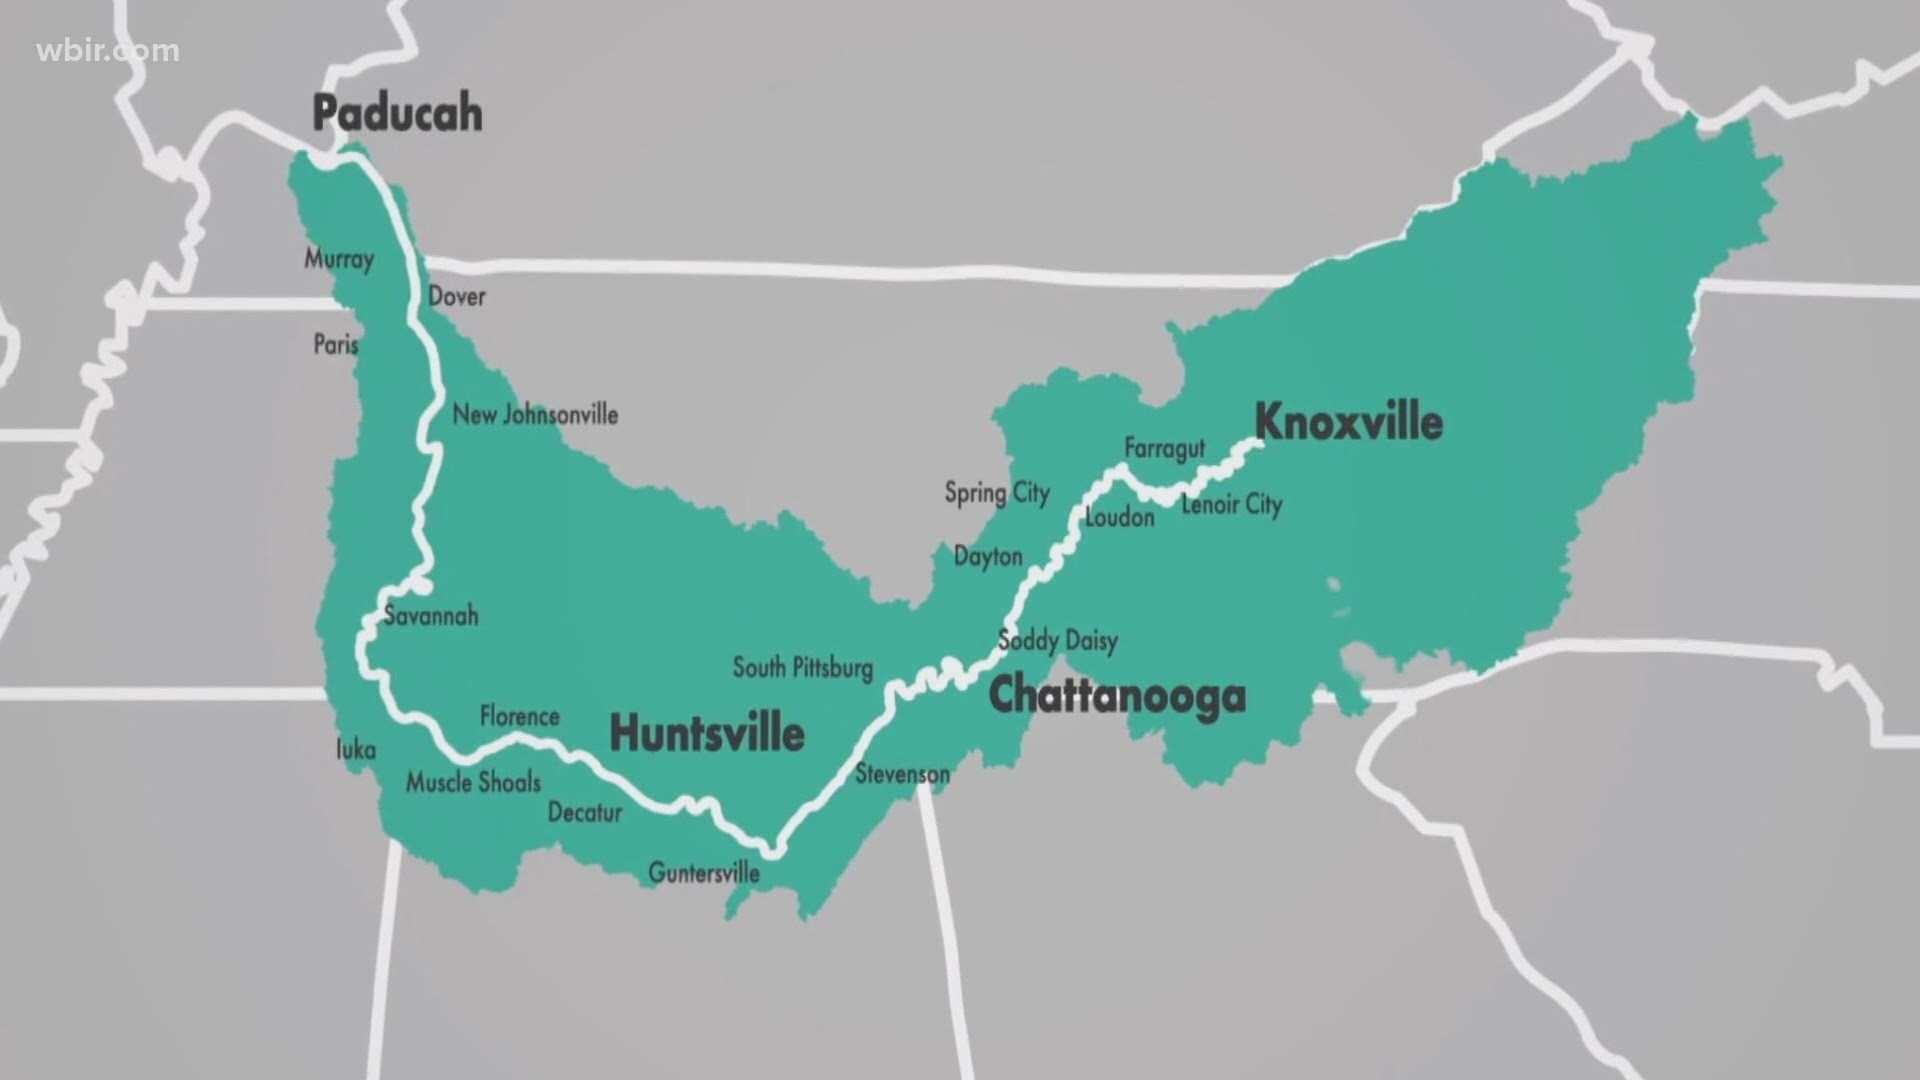 The TVA said it will commit $1.2 million over three years to create the 652-mile trail system.